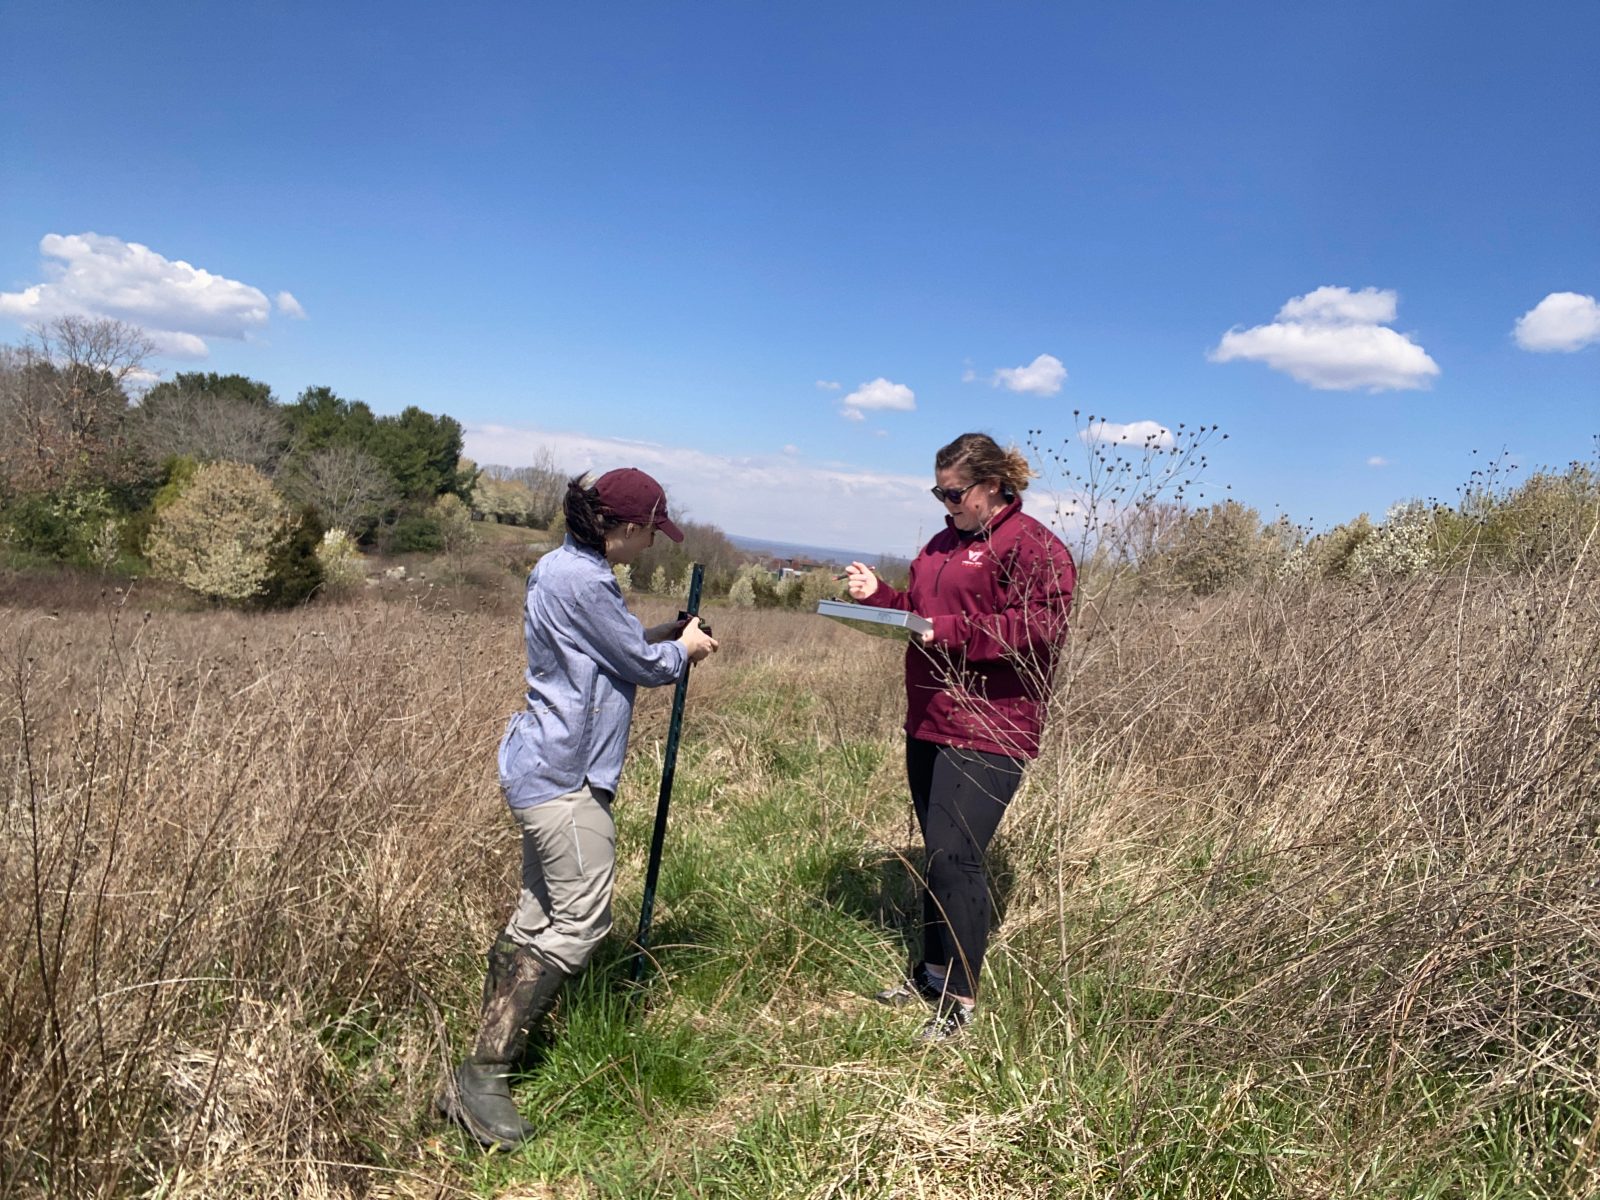 (From left) Gabrielle Ripa and Grace O’Malley check on one of their recording devices that is gathering acoustic data in various ecosystems around the Town of Blacksburg and surrounding areas.